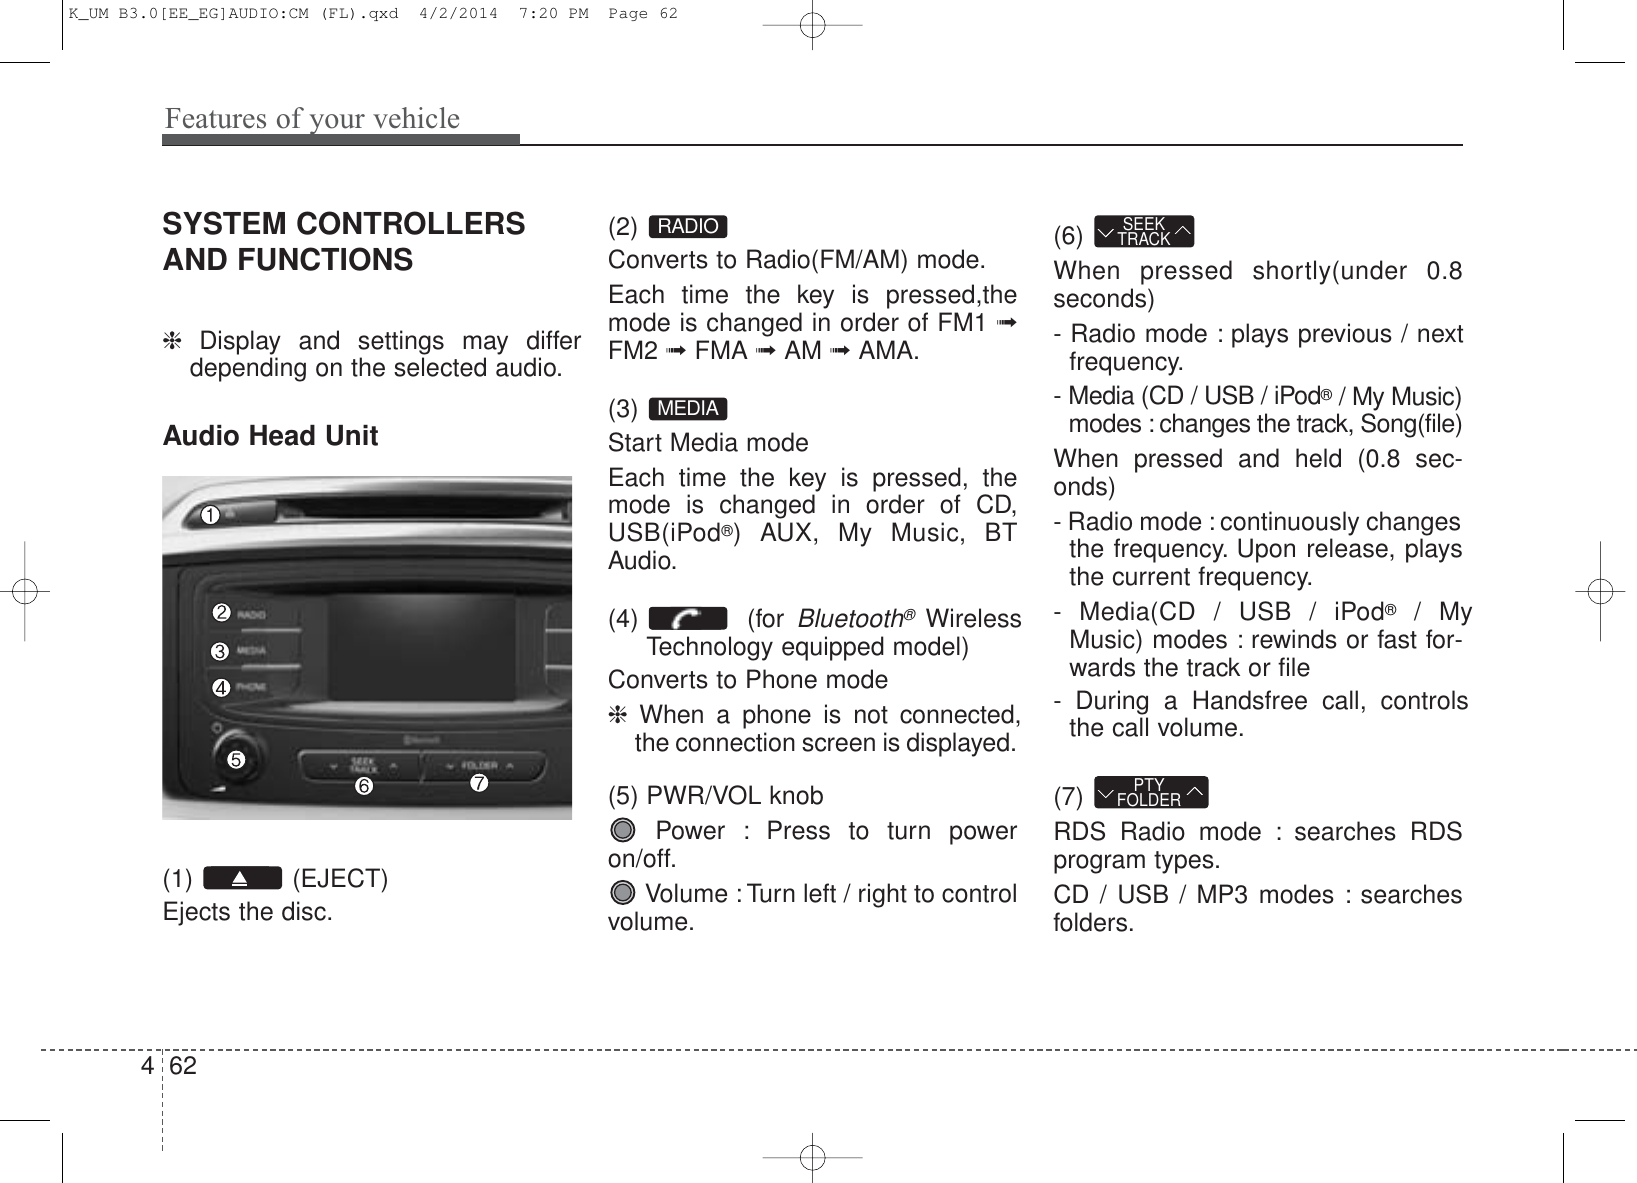 Features of your vehicle624SYSTEM CONTROLLERSAND FUNCTIONS ❈  Display and settings may differdepending on the selected audio.Audio Head Unit (1) (EJECT)Ejects the disc.(2) Converts to Radio(FM/AM) mode.Each time the key is pressed,themode is changed in order of FM1 ➟FM2 ➟FMA ➟AM ➟AMA.(3) Start Media modeEach time the key is pressed, themode is changed in order of CD,USB(iPod®) AUX, My Music, BTAudio.(4) (for Bluetooth®Wireless Technology equipped model)Converts to Phone mode❈  When a phone is not connected,the connection screen is displayed.(5) PWR/VOL knobPower : Press to turn poweron/off.Volume : Turn left / right to controlvolume.(6) When pressed shortly(under 0.8seconds)- Radio mode : plays previous / nextfrequency.- Media (CD / USB / iPod®/ My Music)modes : changes the track, Song(file)When pressed and held (0.8 sec-onds)- Radio mode : continuously changesthe frequency. Upon release, playsthe current frequency.- Media(CD / USB / iPod®/ MyMusic) modes : rewinds or fast for-wards the track or file- During a Handsfree call, controlsthe call volume.(7) RDS Radio mode : searches RDSprogram types.CD / USB / MP3 modes : searchesfolders.PTYFOLDERSEEKTRACKMEDIARADIOK_UM B3.0[EE_EG]AUDIO:CM (FL).qxd  4/2/2014  7:20 PM  Page 62